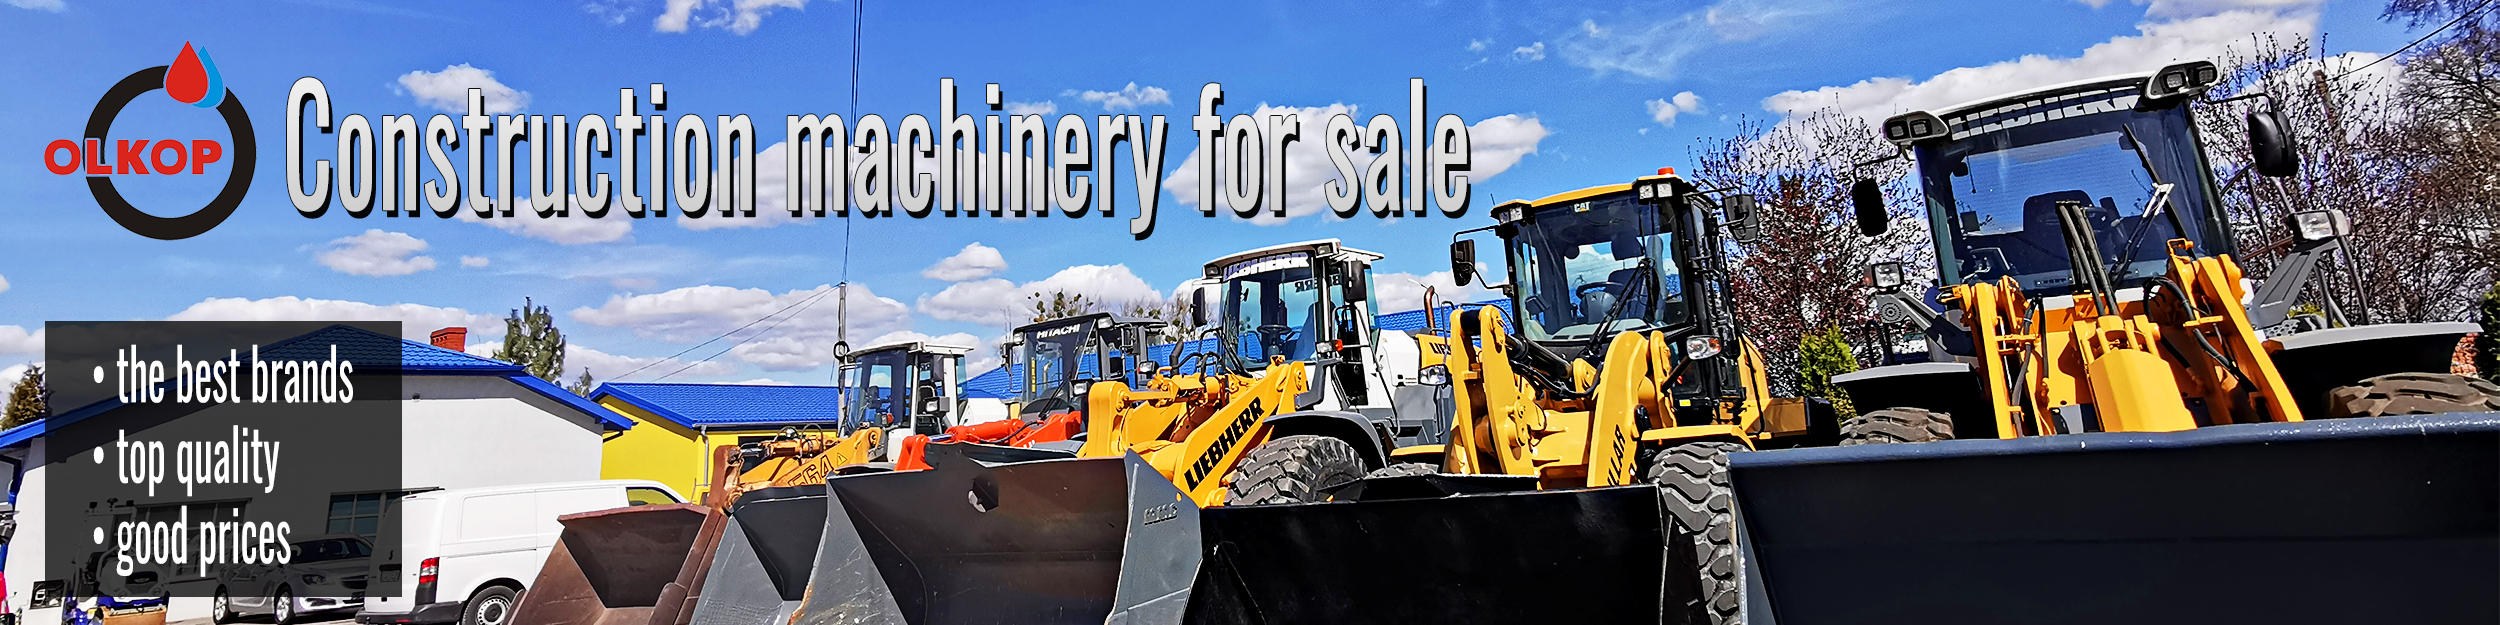 Construction machinery for sale